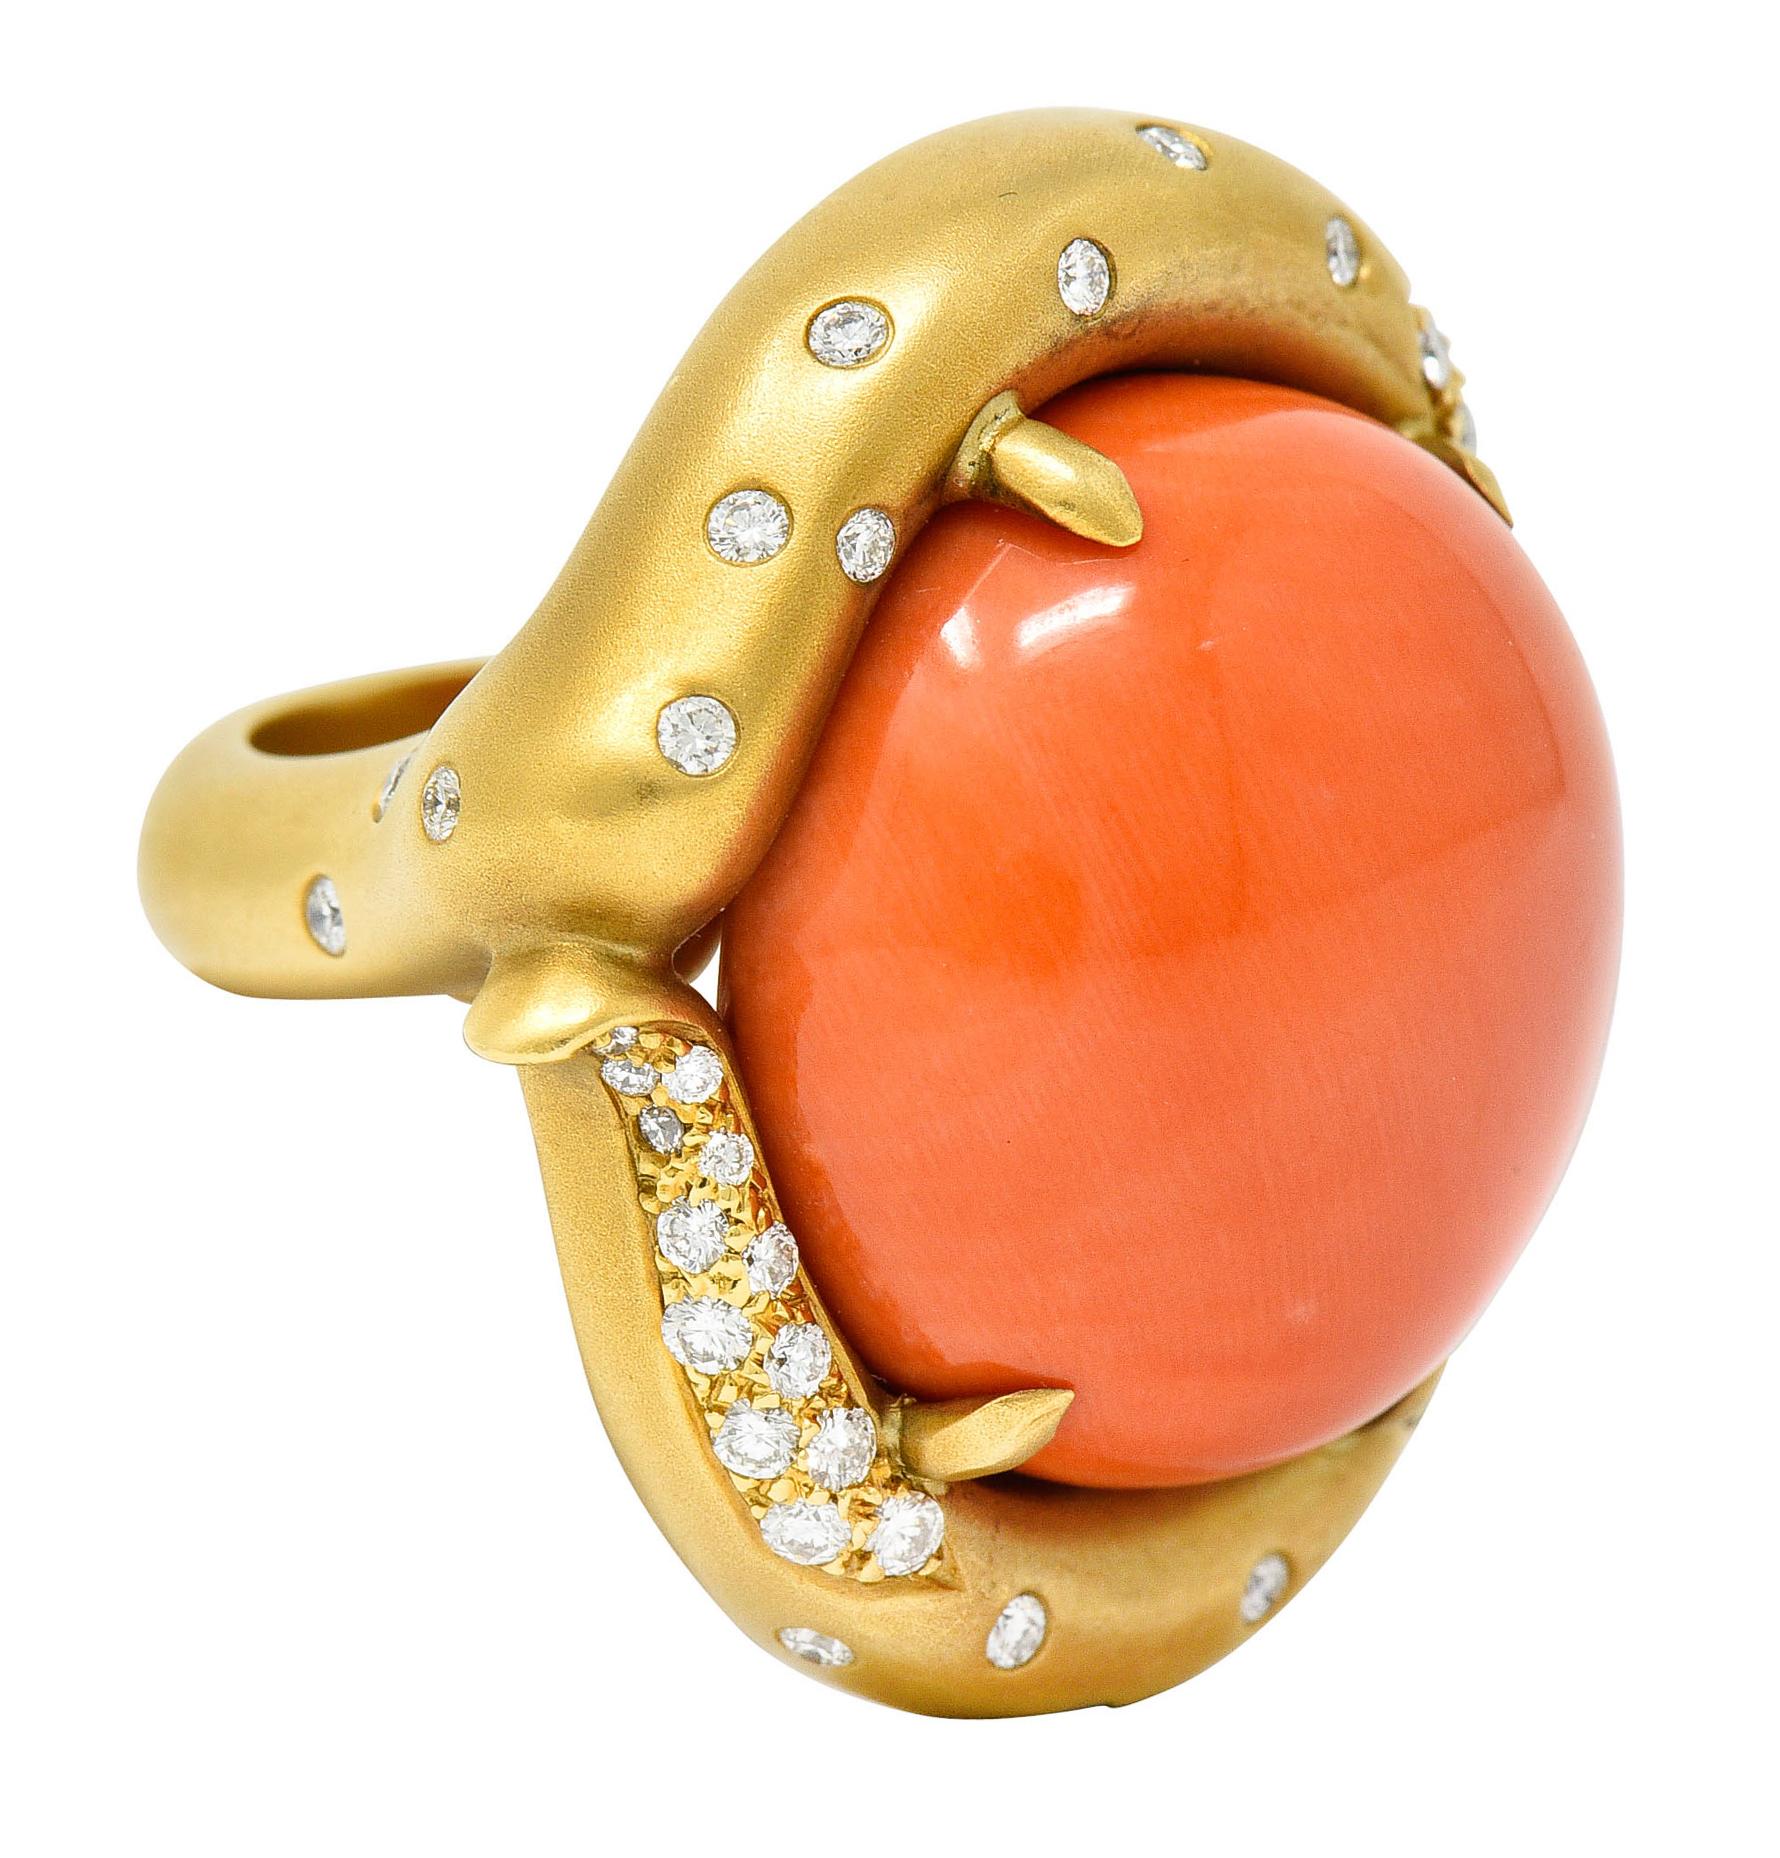 Bypass style ring centers a large round coral cabochon measuring approximately 22.8 mm

Opaque with very uniform pastel pinkish orange color

With a matte gold tendril surround accented by round brilliant cut diamonds

Weighing in total